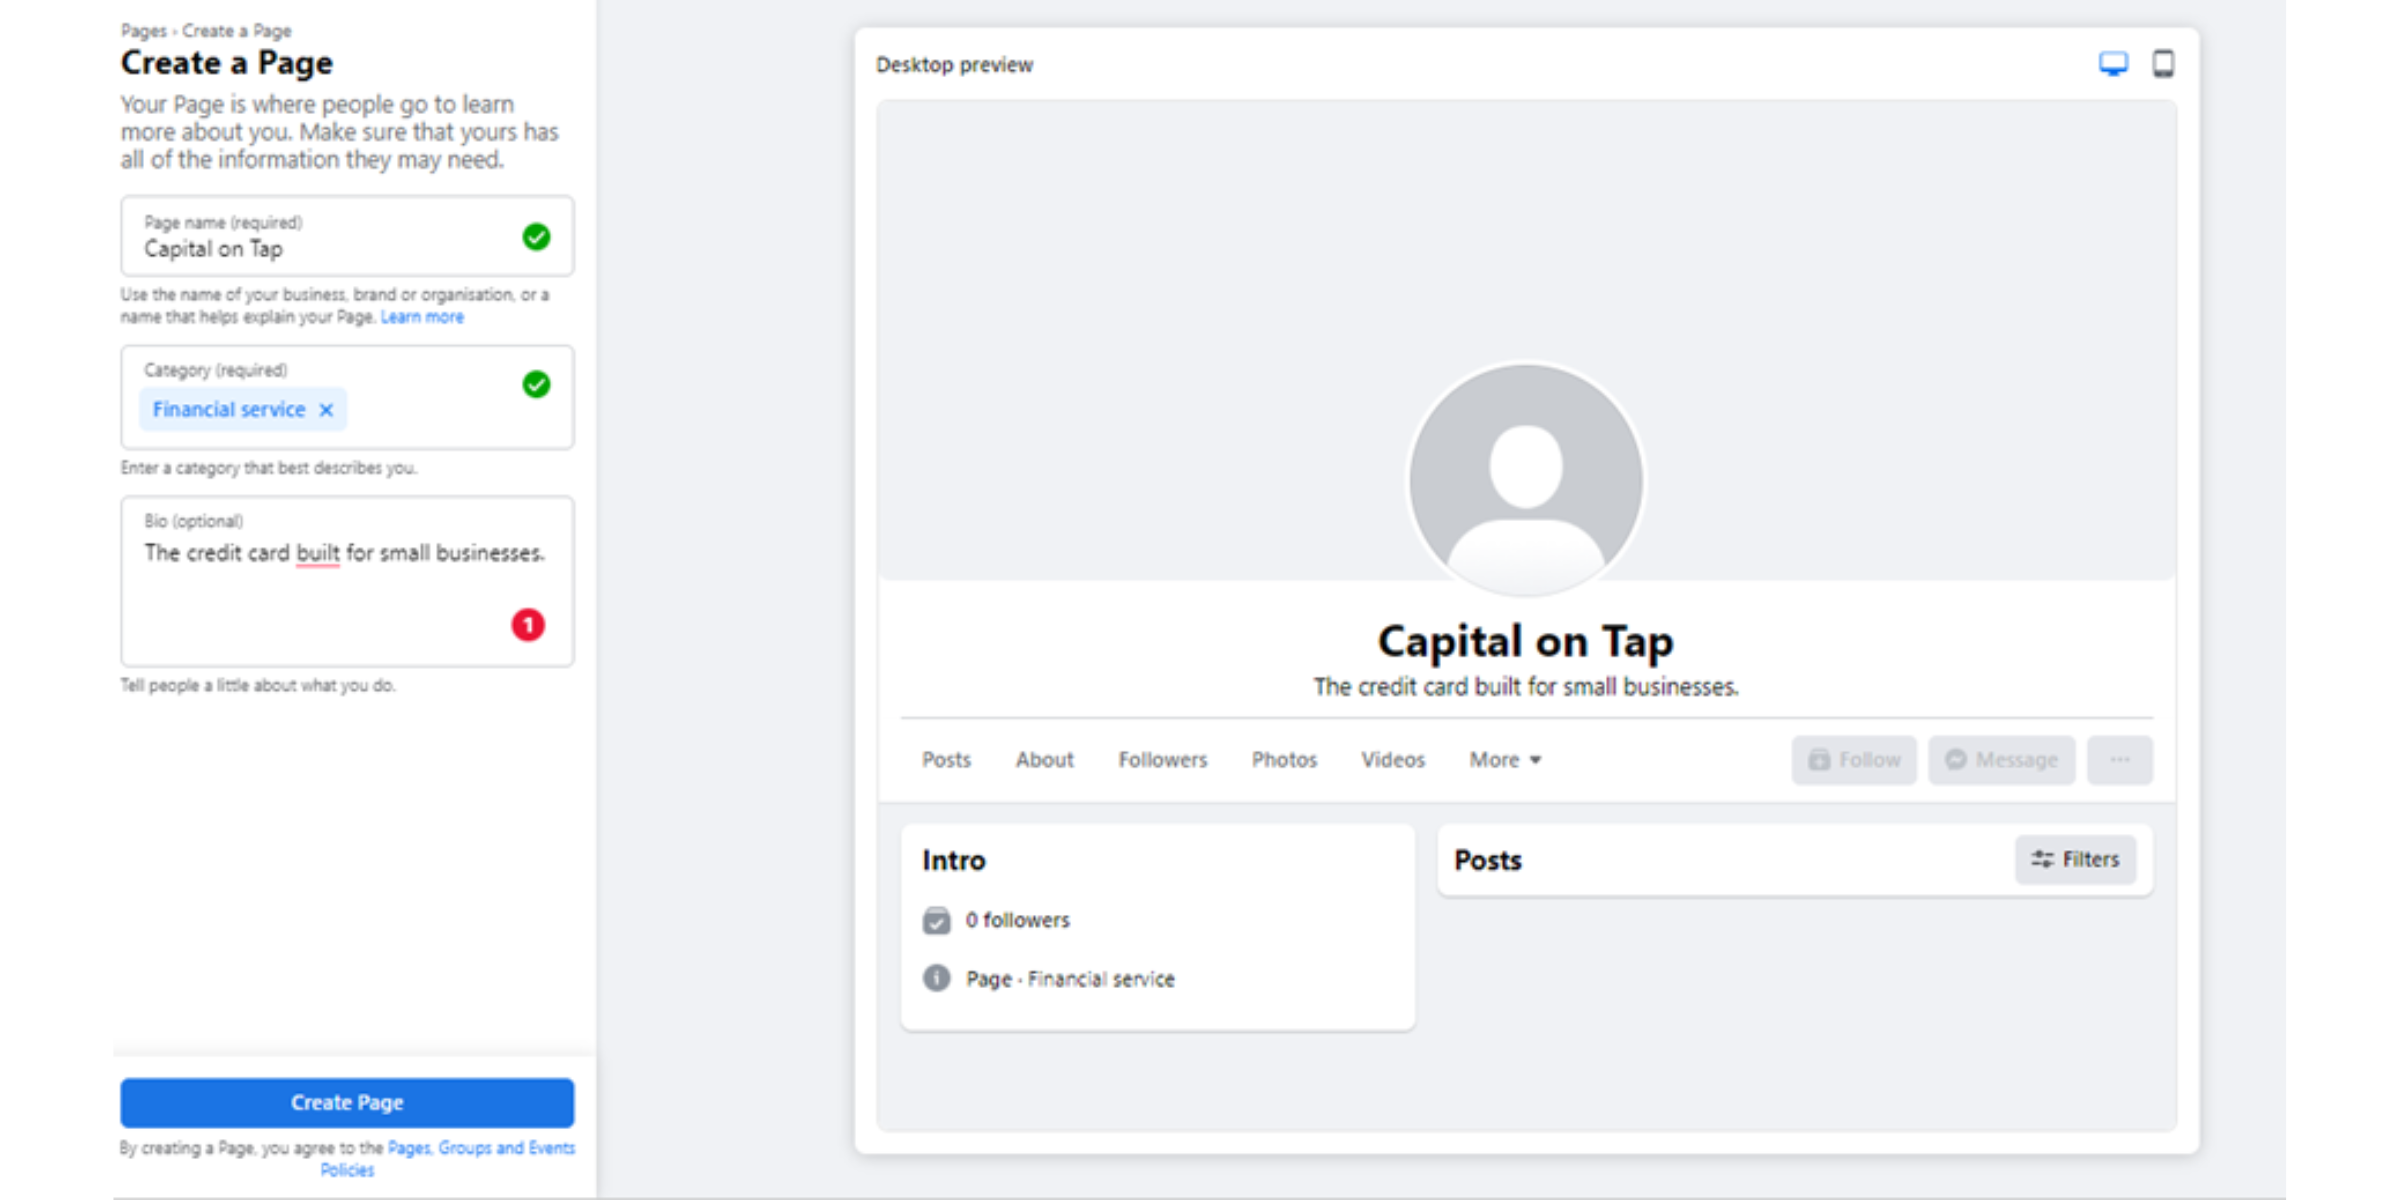 Screenshot of the 'Create a Page' page on Facebook. It shows a Capital on Tap page being created